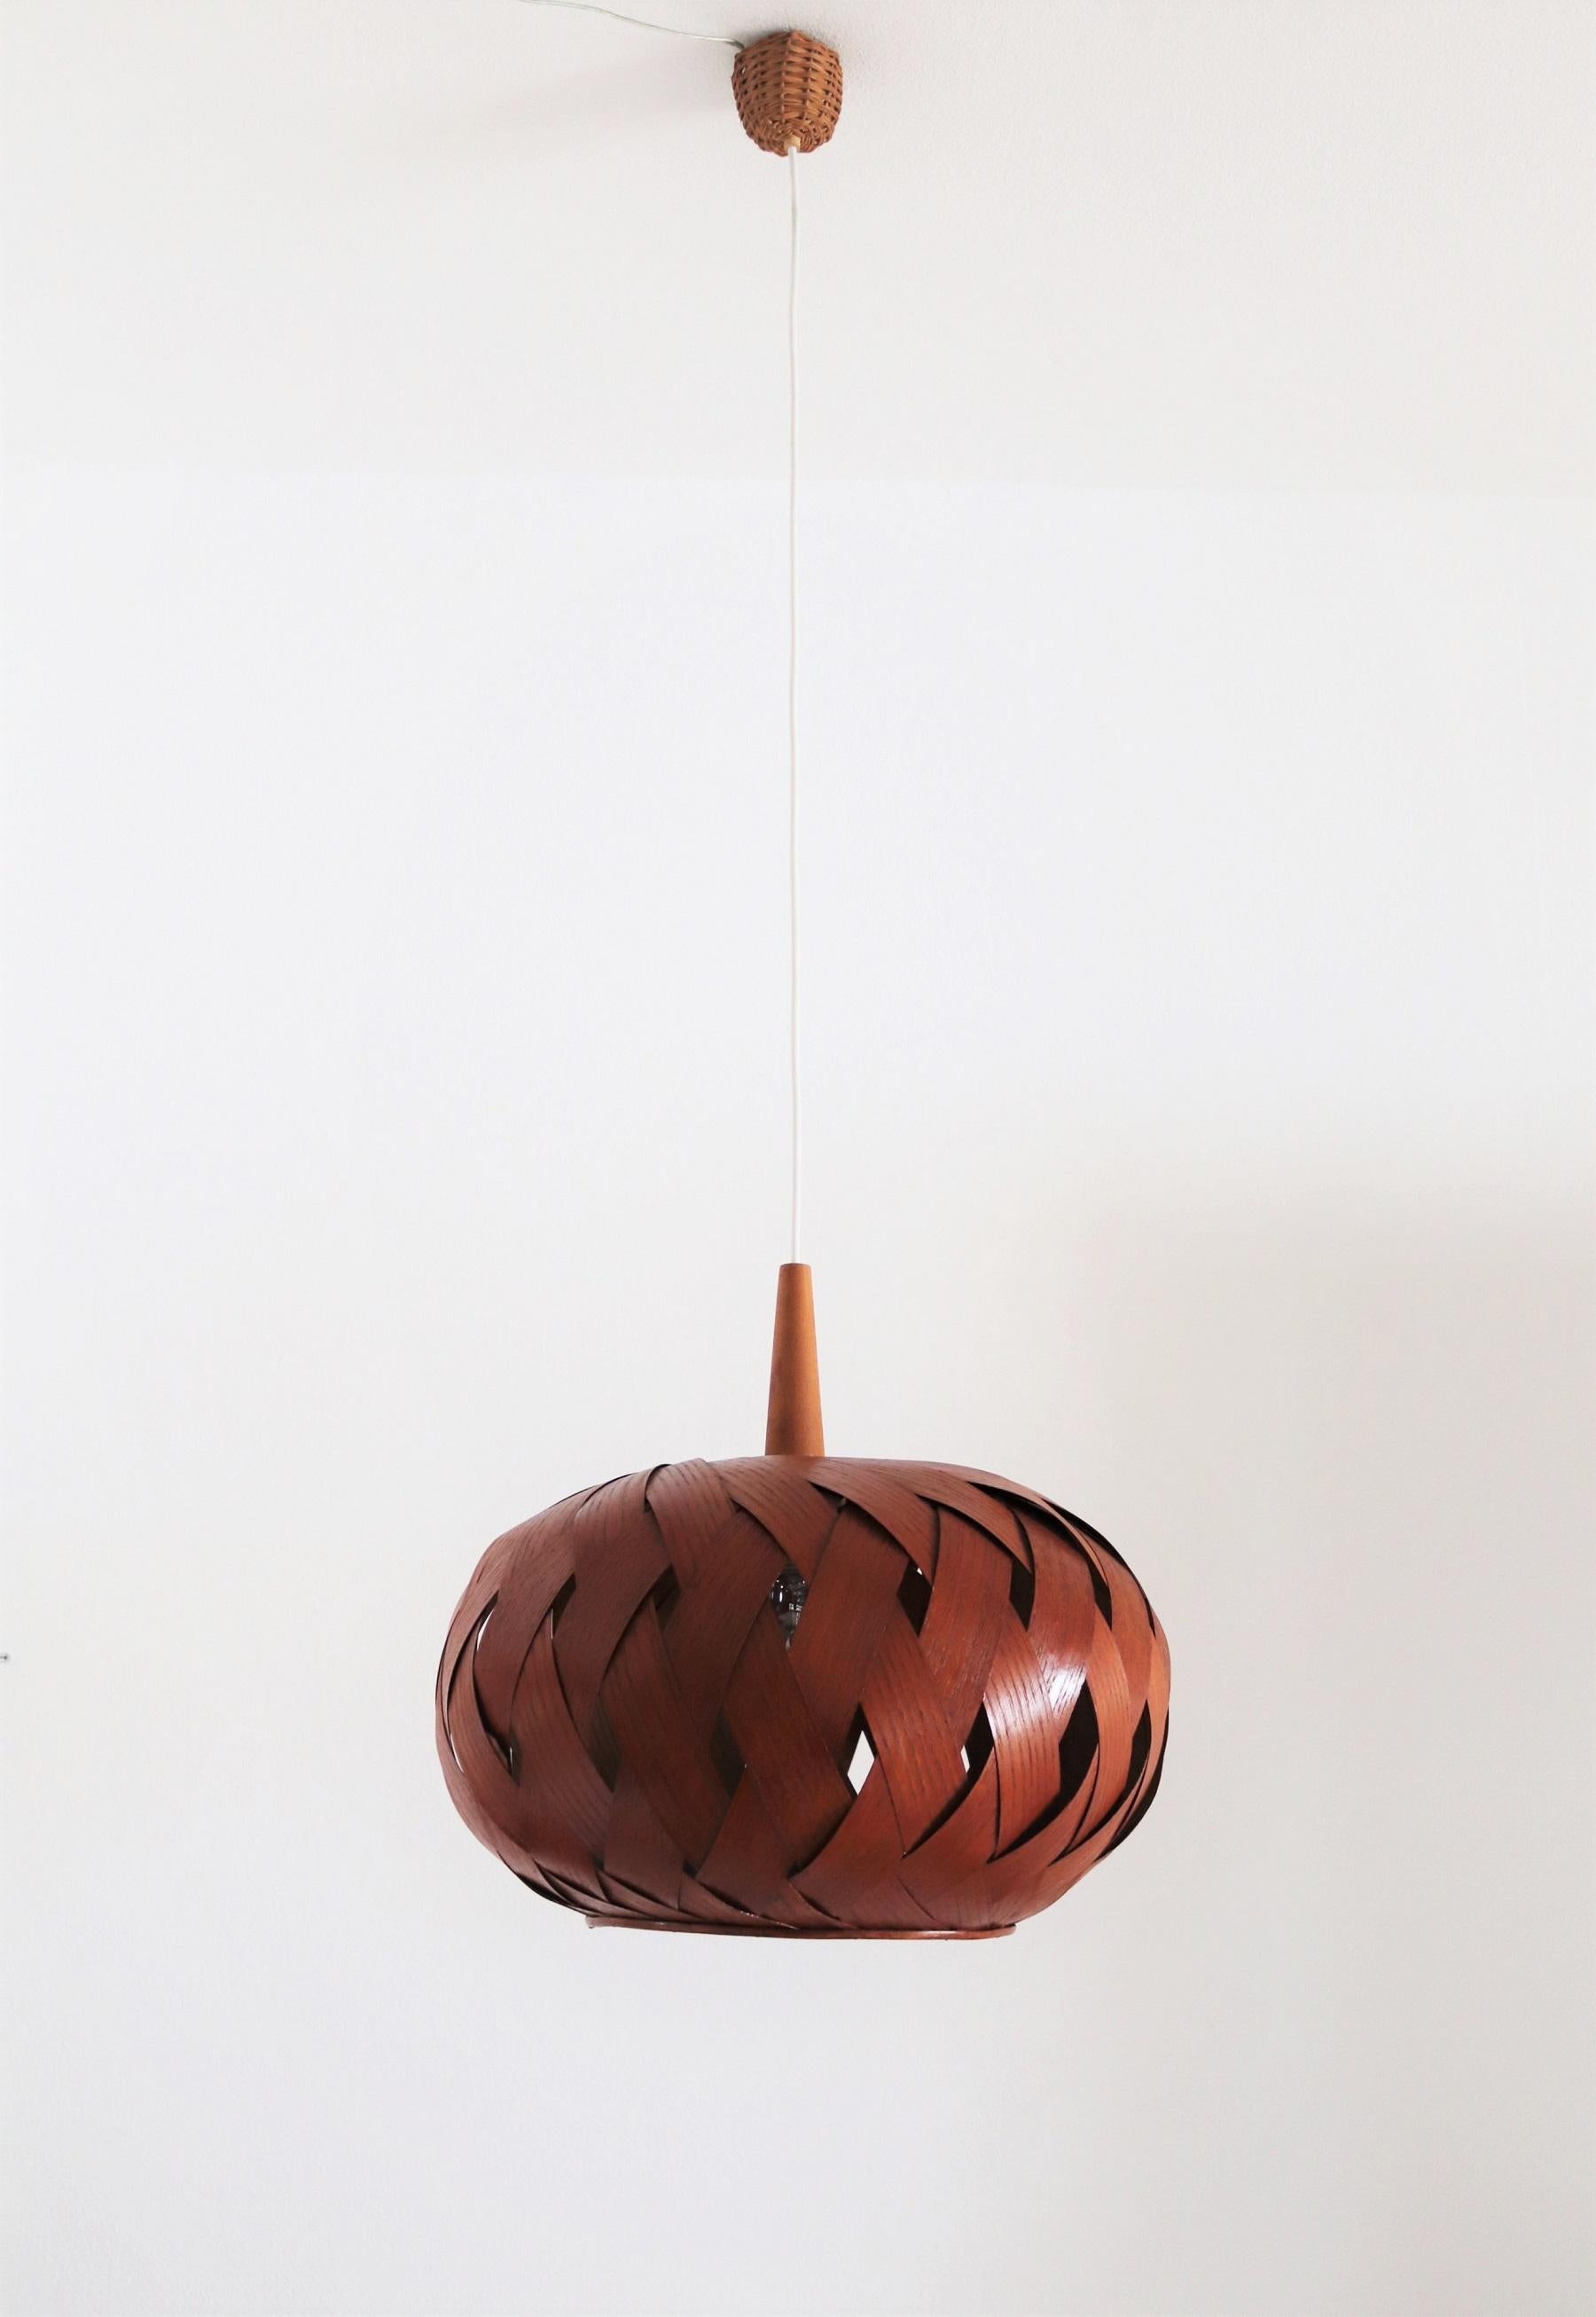 12 pcs. available.
Gorgeous modern pendant lamp in organic, natural shape made of teak wood veneer or bentwood, teak details and wicker in the middle of the 20th Century.
The pendant is hand crafted and in good to excellent condition.
The